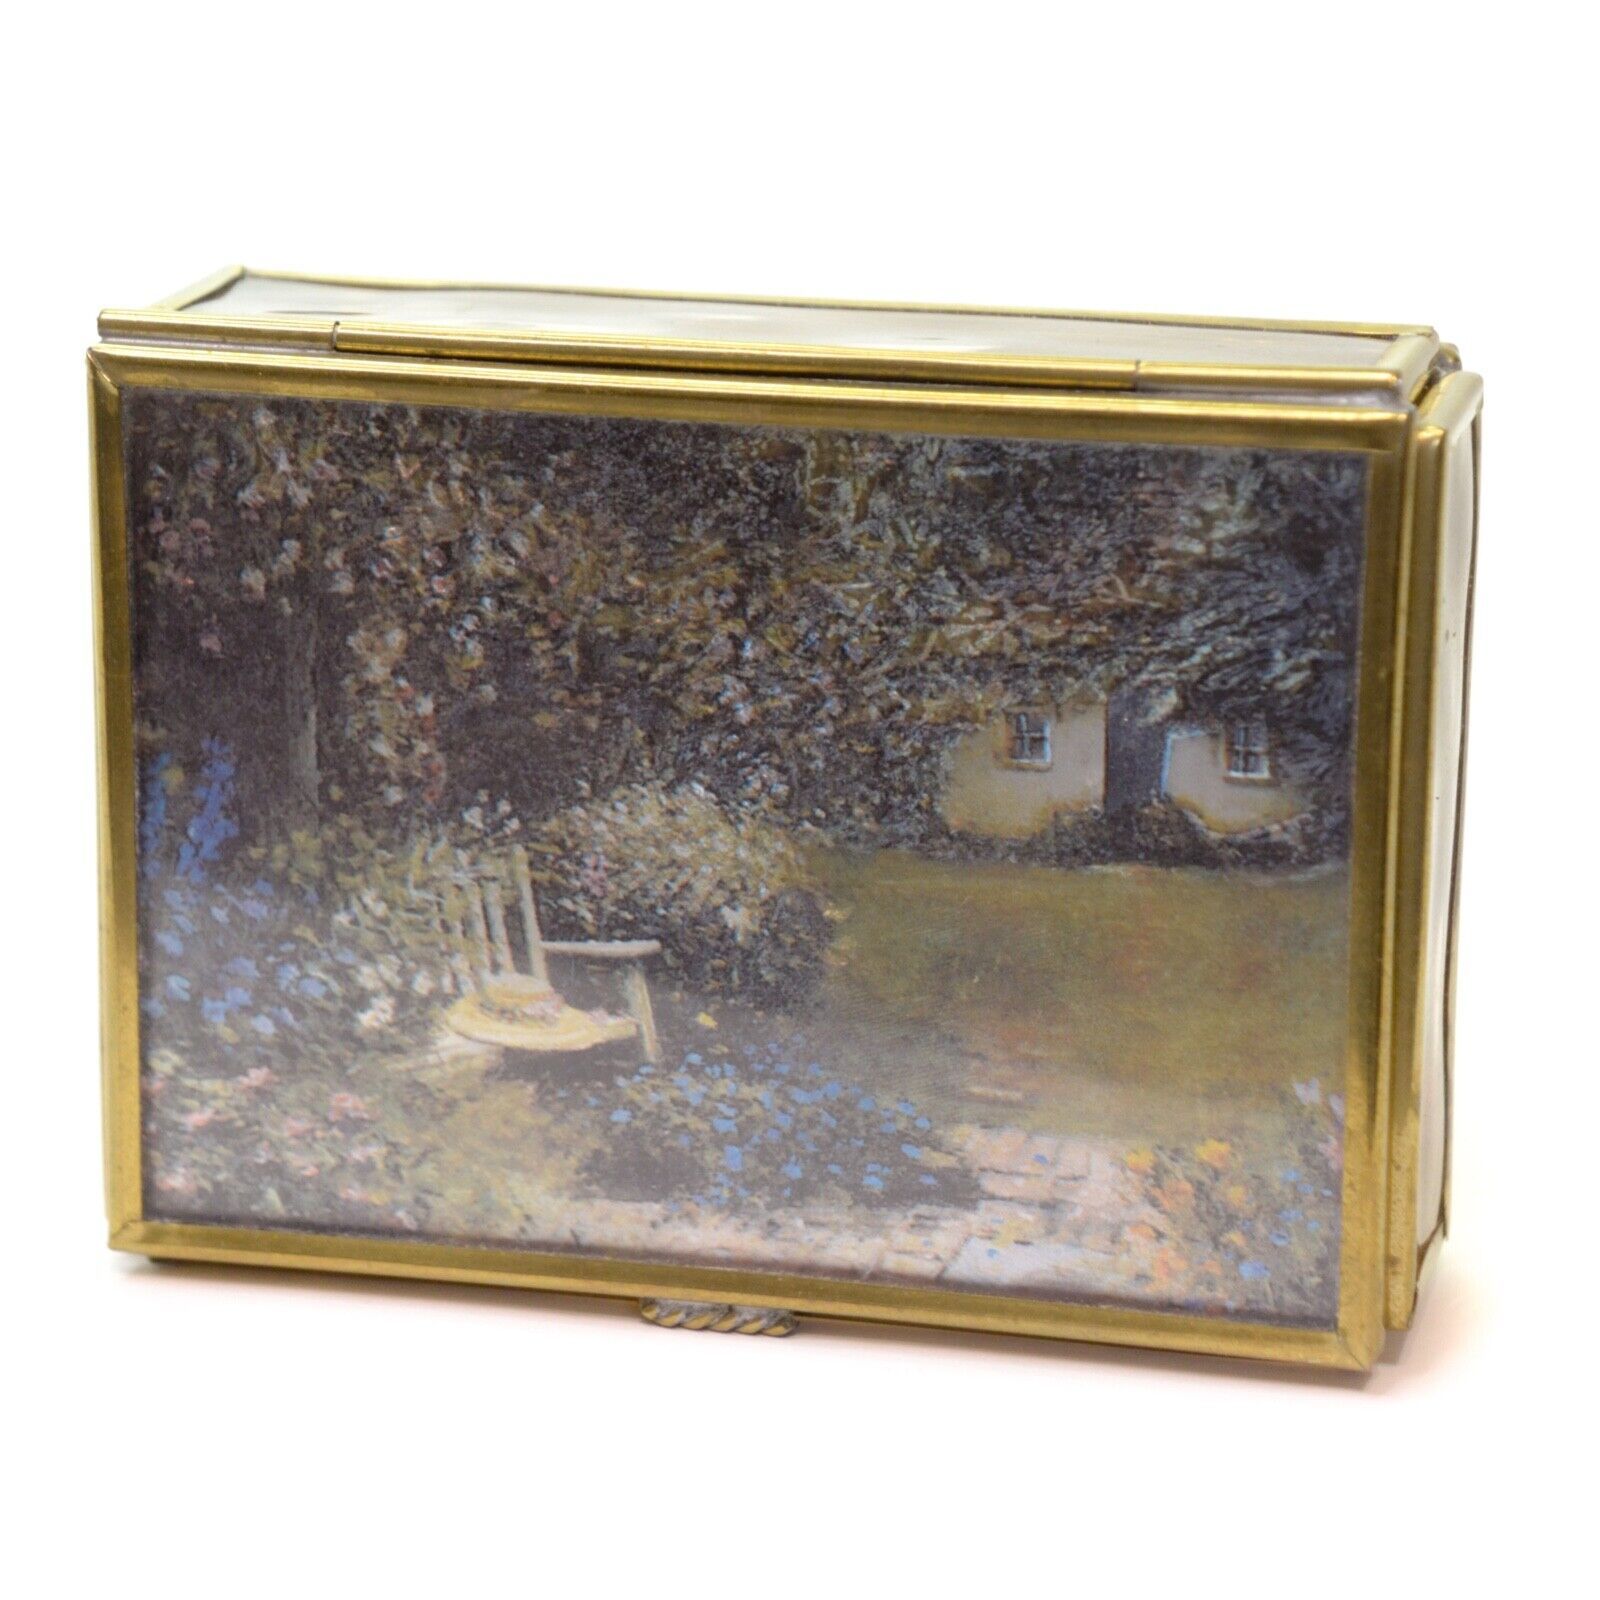 Primary image for Vintage Enesco Brass And Glass Country Scene Trinket Box Mirrored Made in Mexico